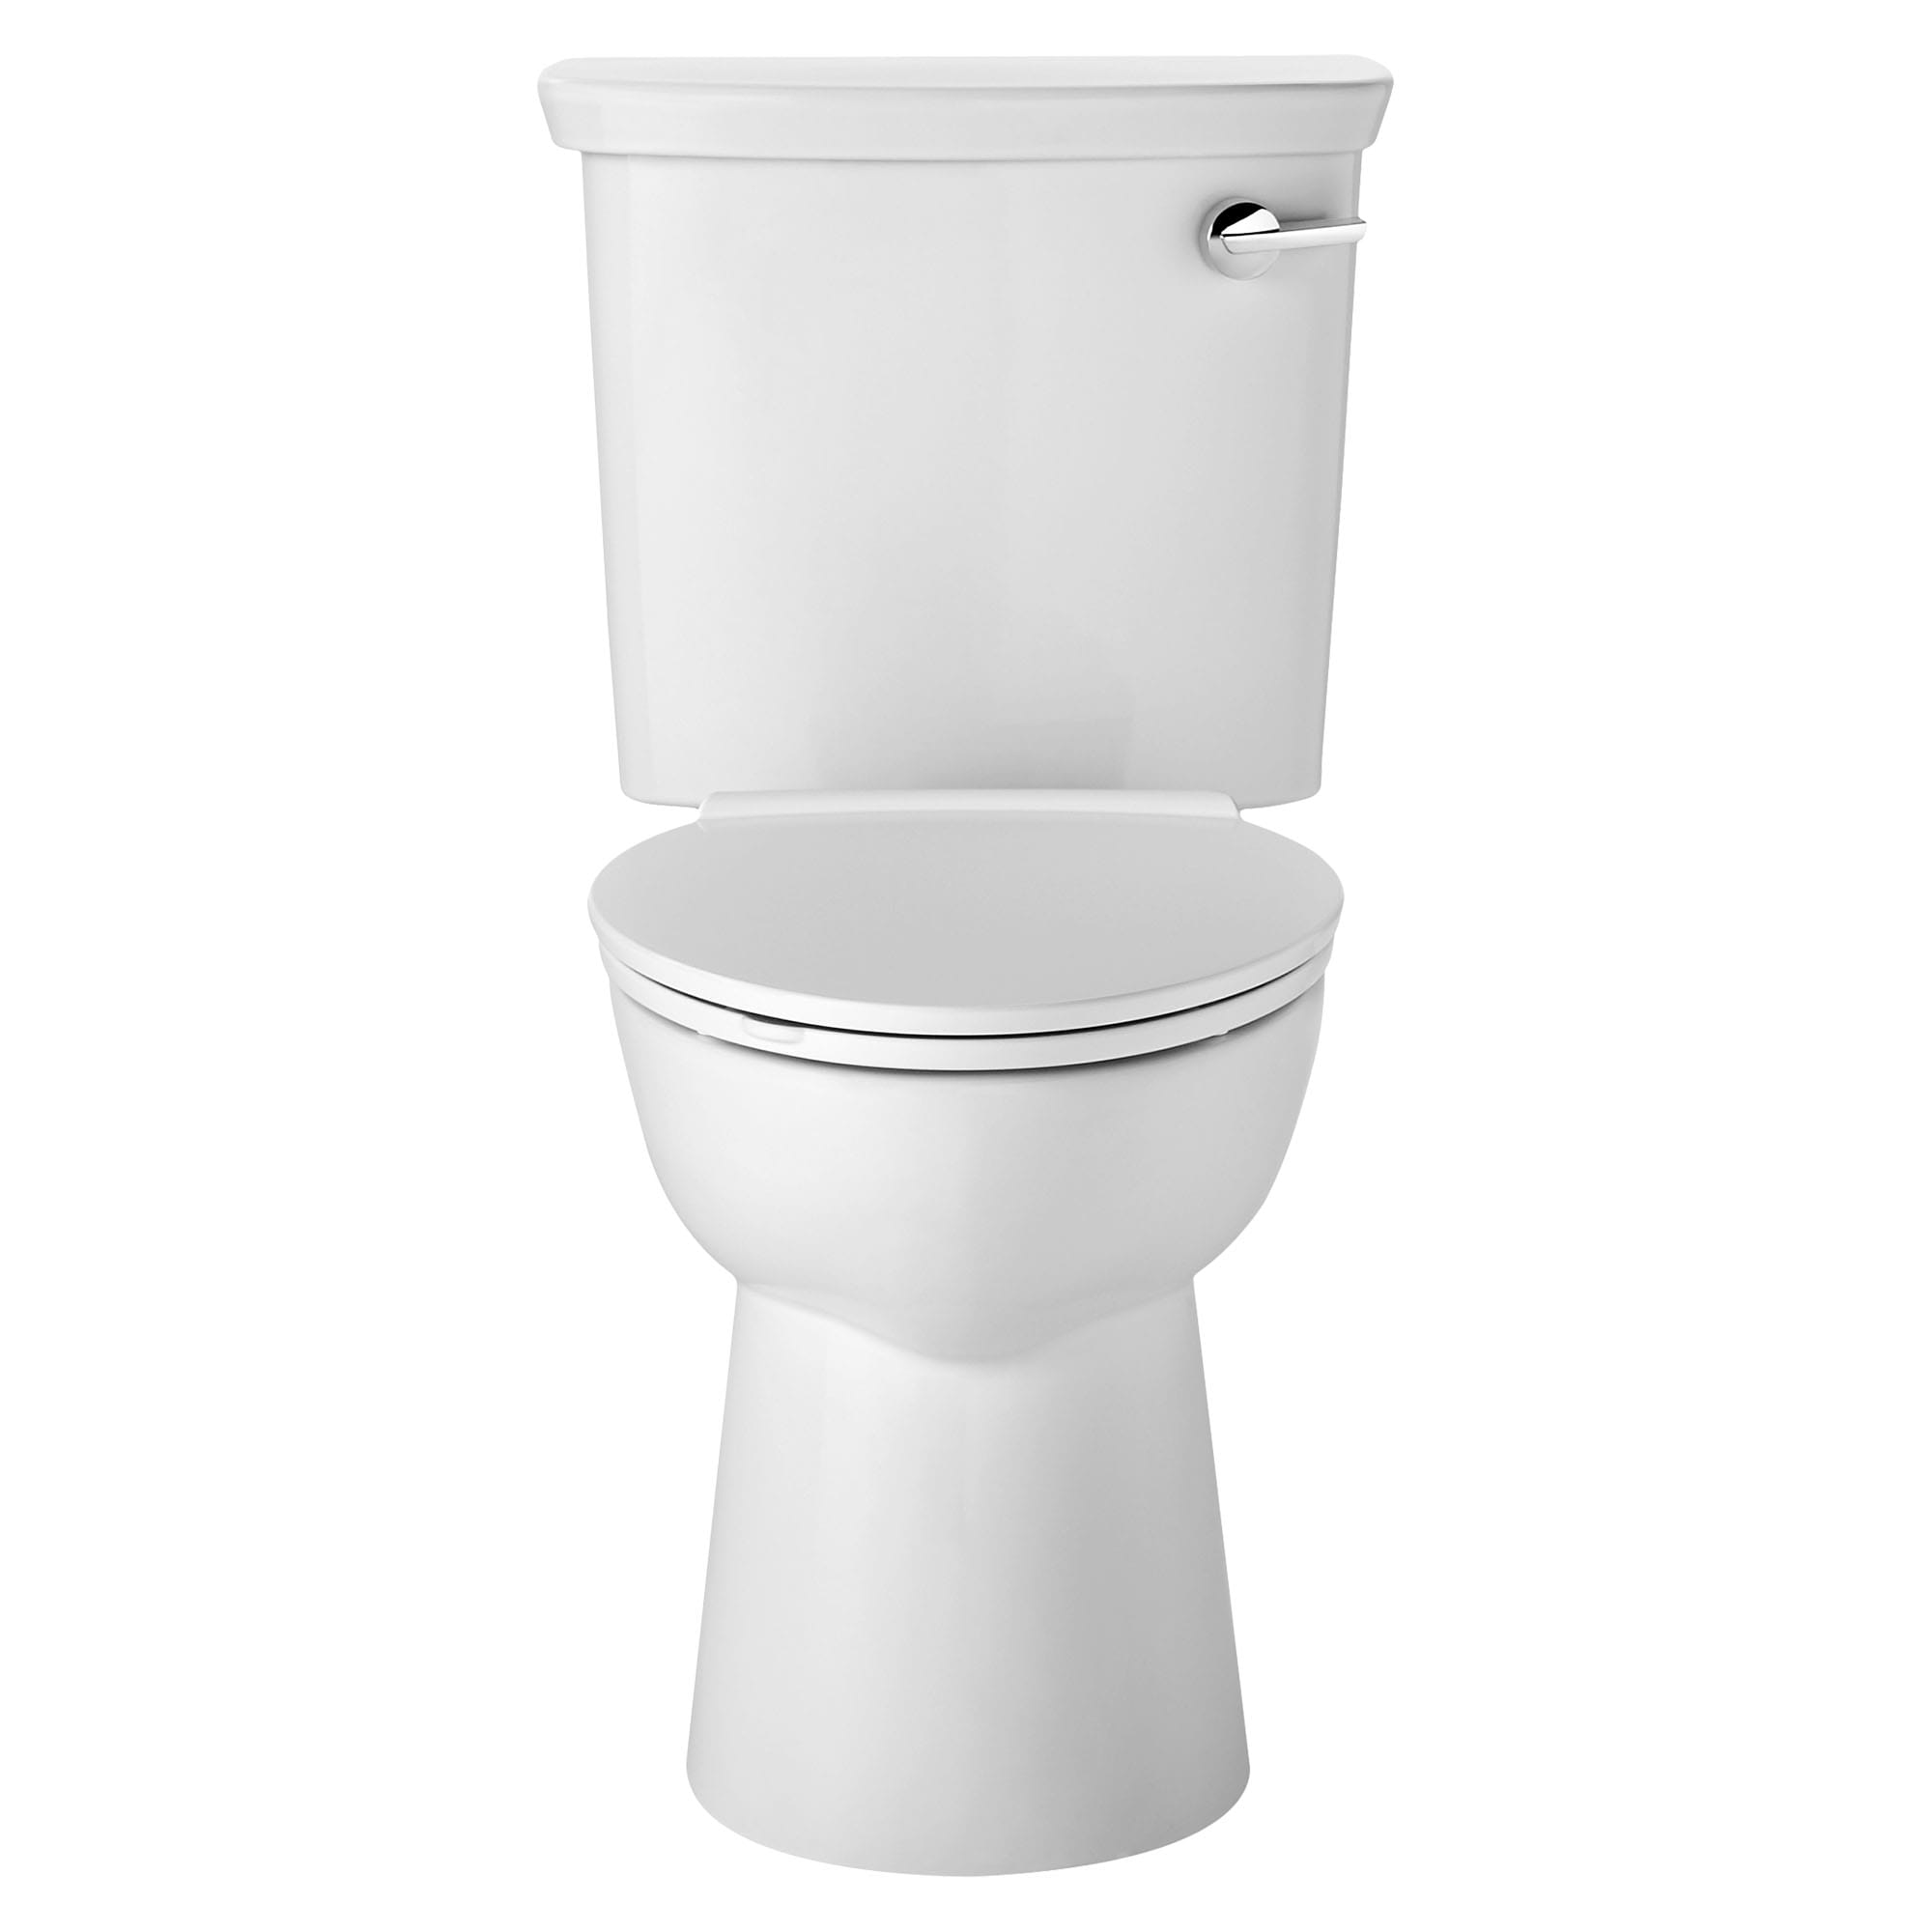 VorMax® Two-Piece 1.28 gpf/4.8 Lpf Chair Height Elongated Right-Hand Trip Lever Toilet Less Seat